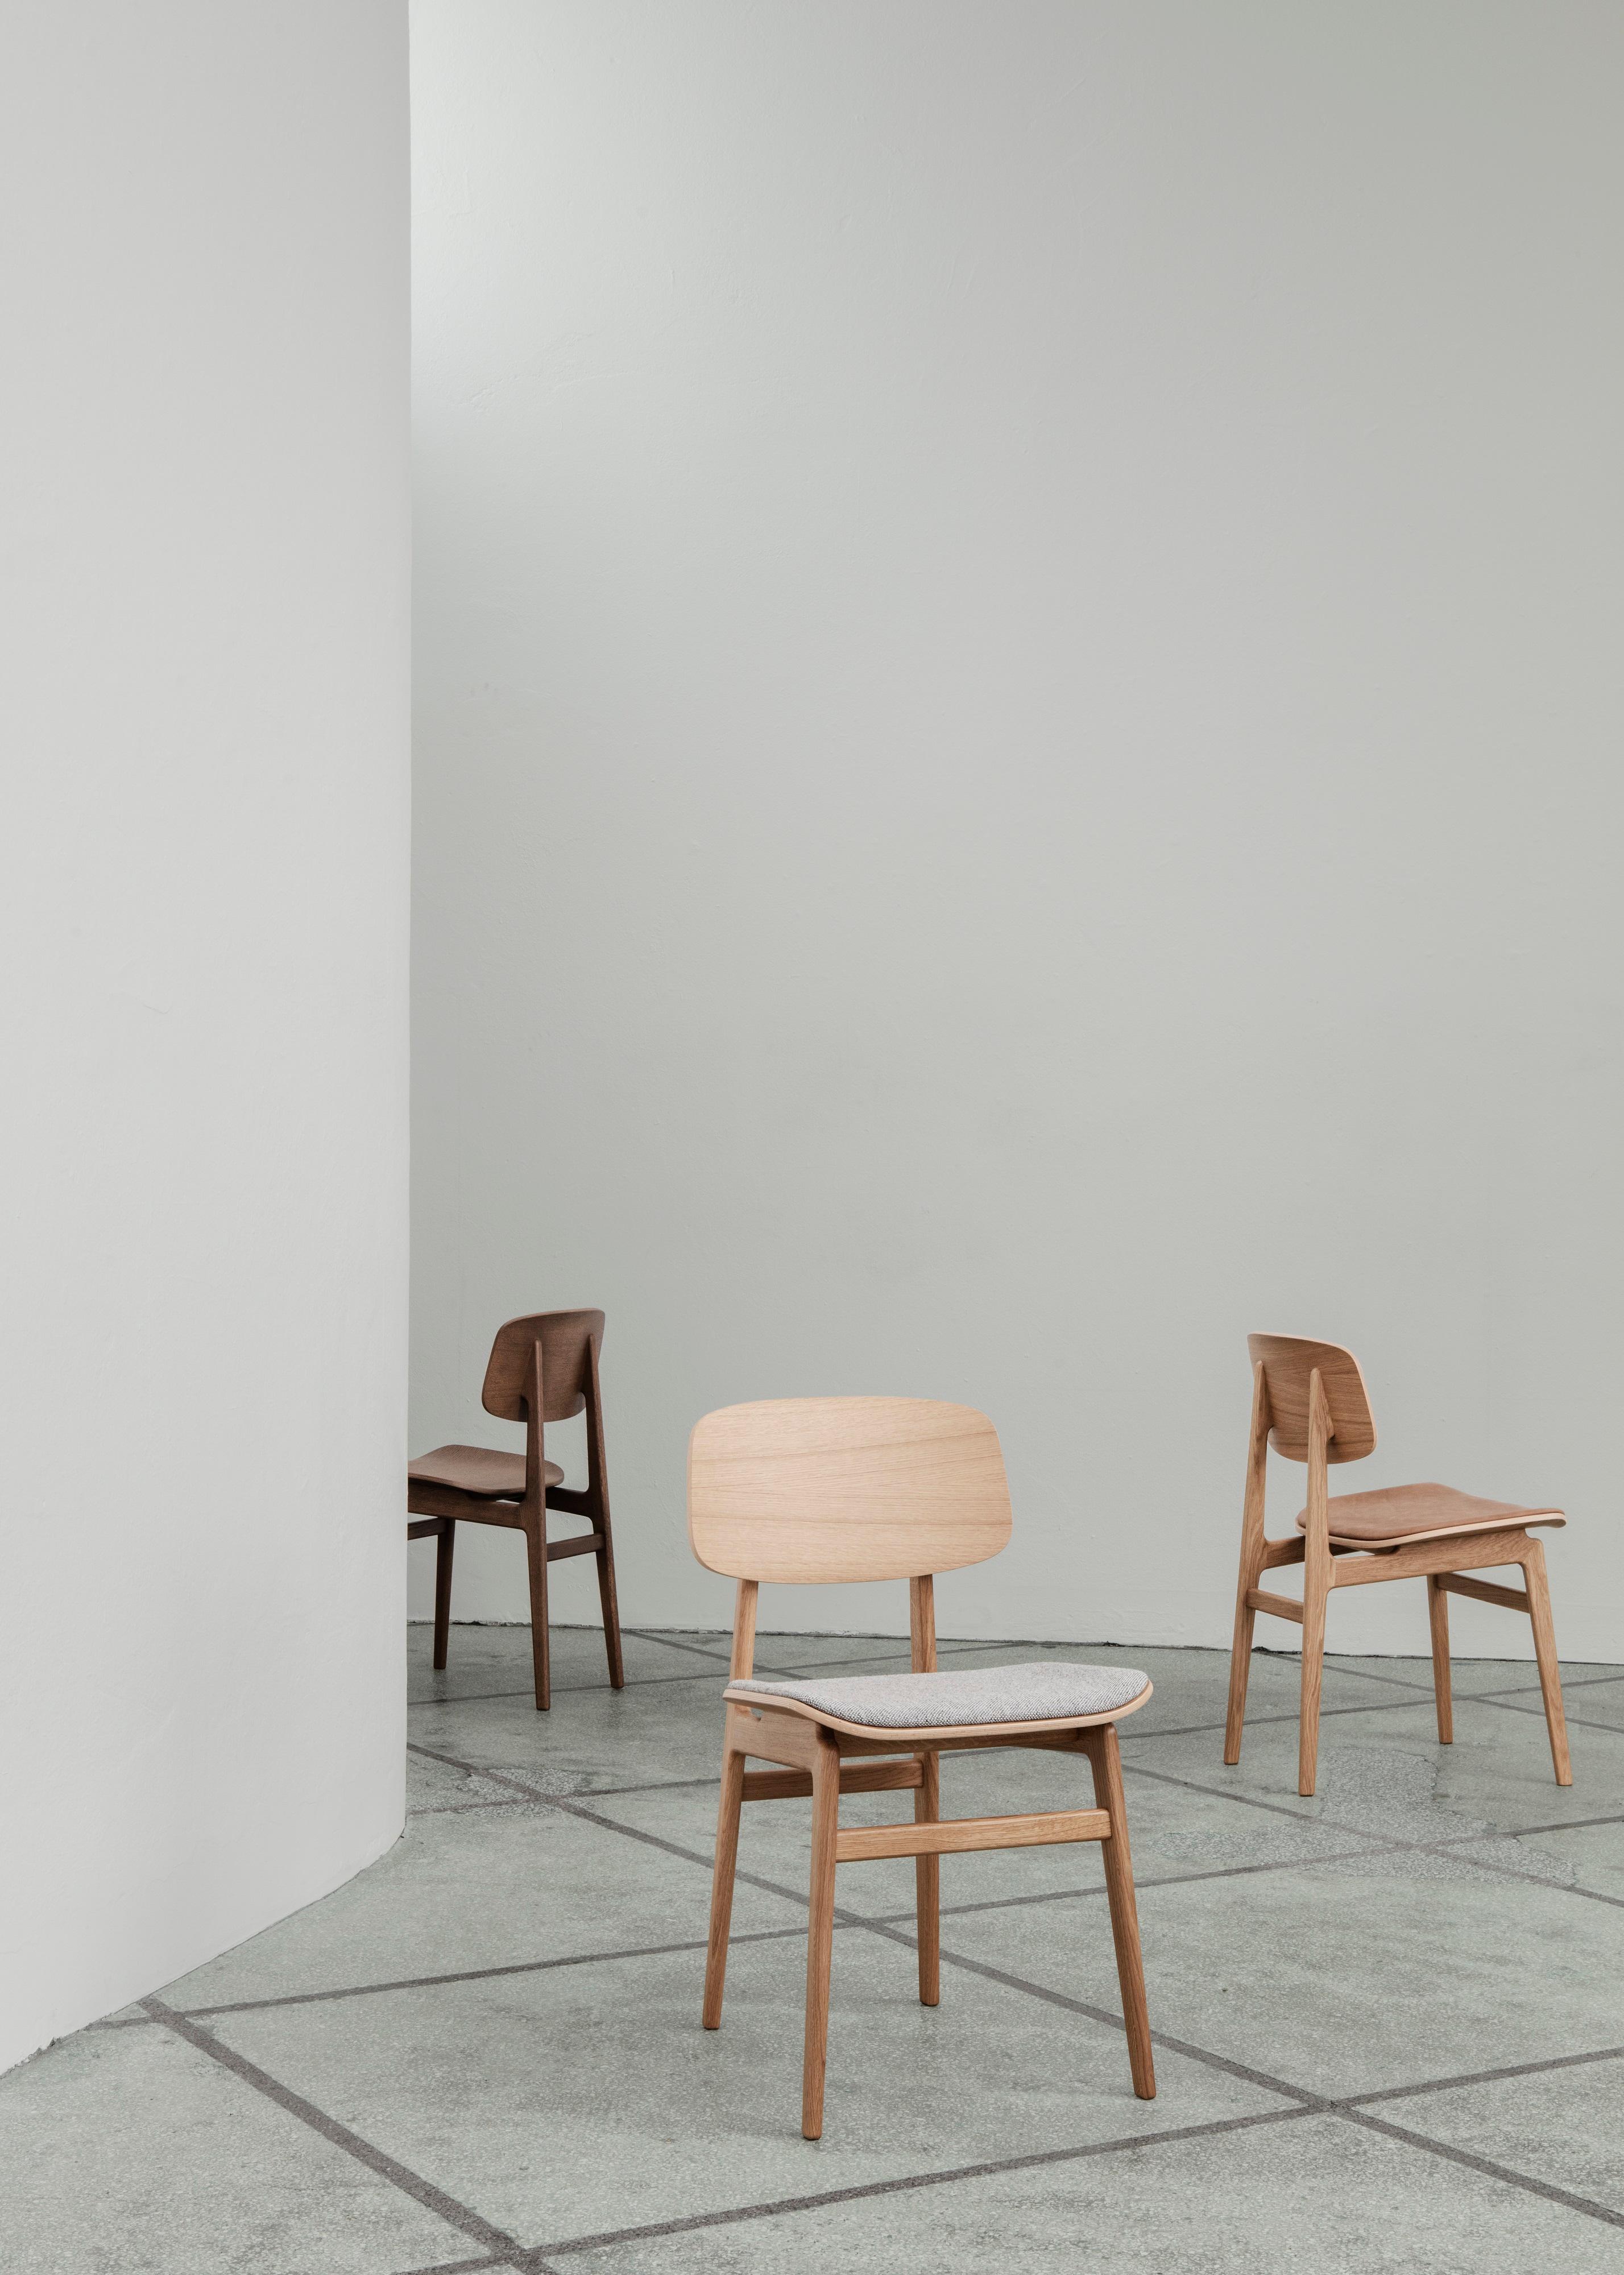 NY11 Chair by NORR11
Dimensions: D 52 x W 45,5 x H 78 cm. SH 45,5 cm / SH w. upholstery 46,5 cm.
Materials: Natural oak.

Available in different oak finishes: Natural oak, light smoked oak, dark smoked oak, black oak. Also available in different